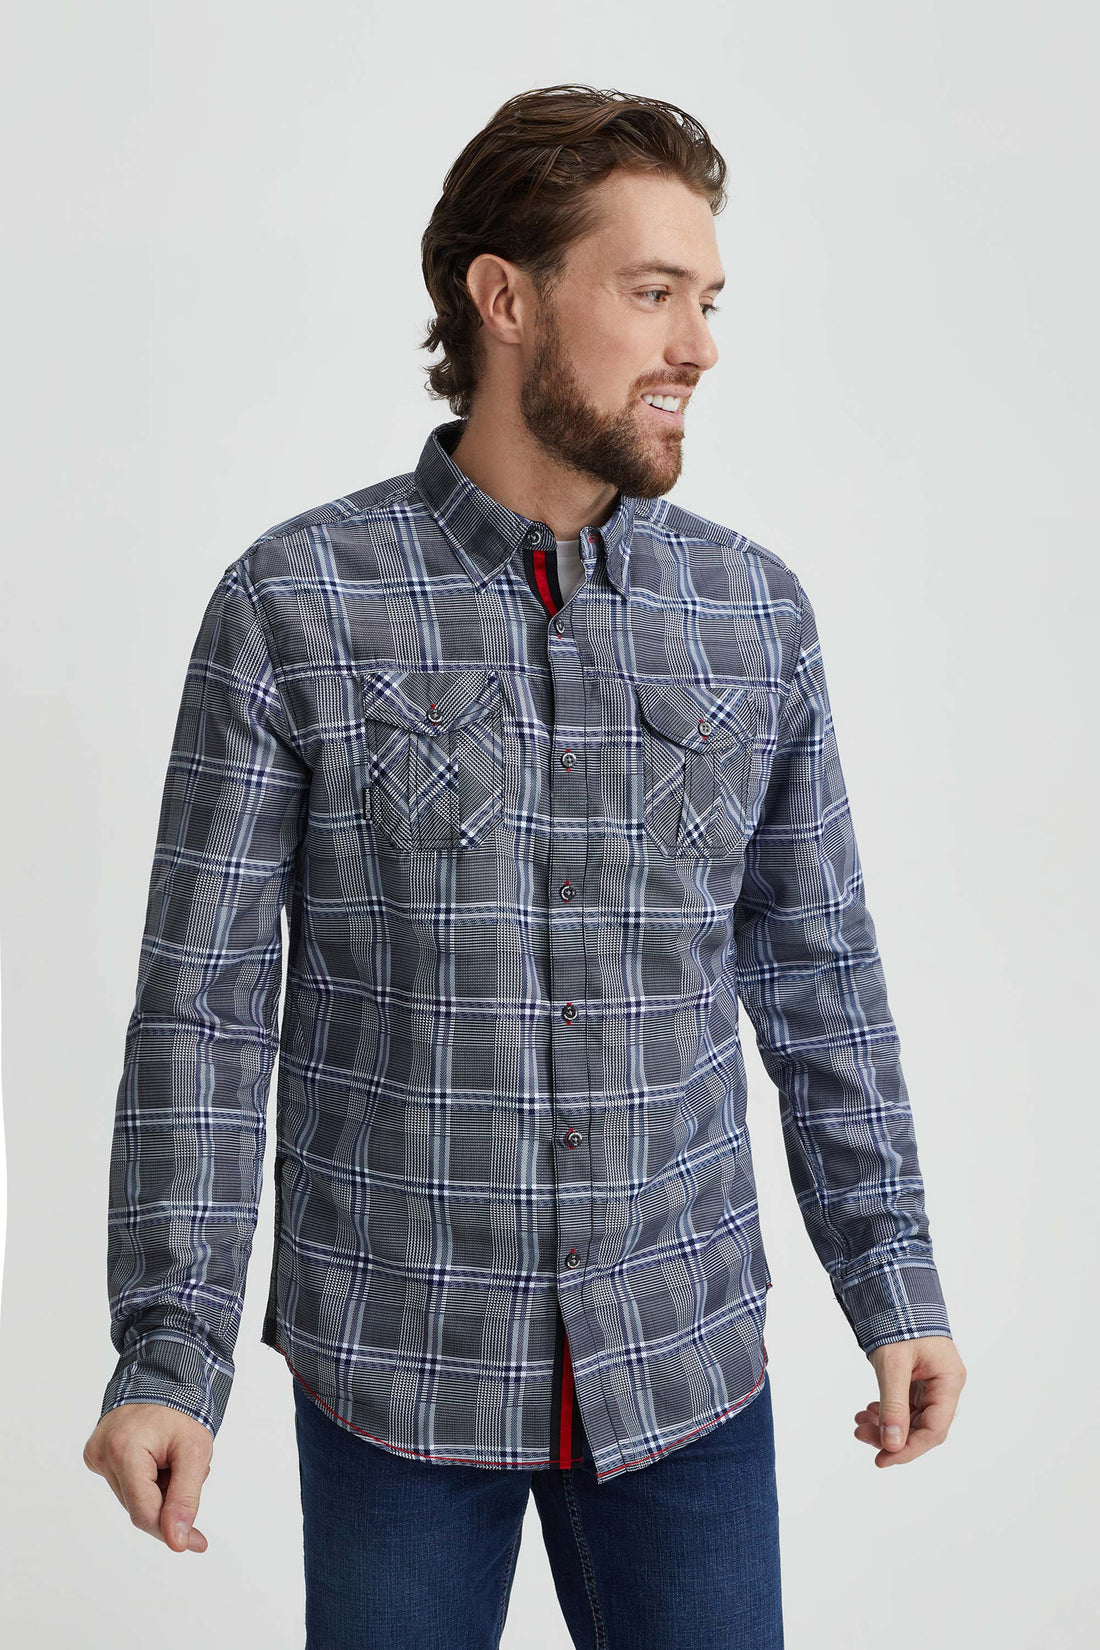 Shirt with various checkers